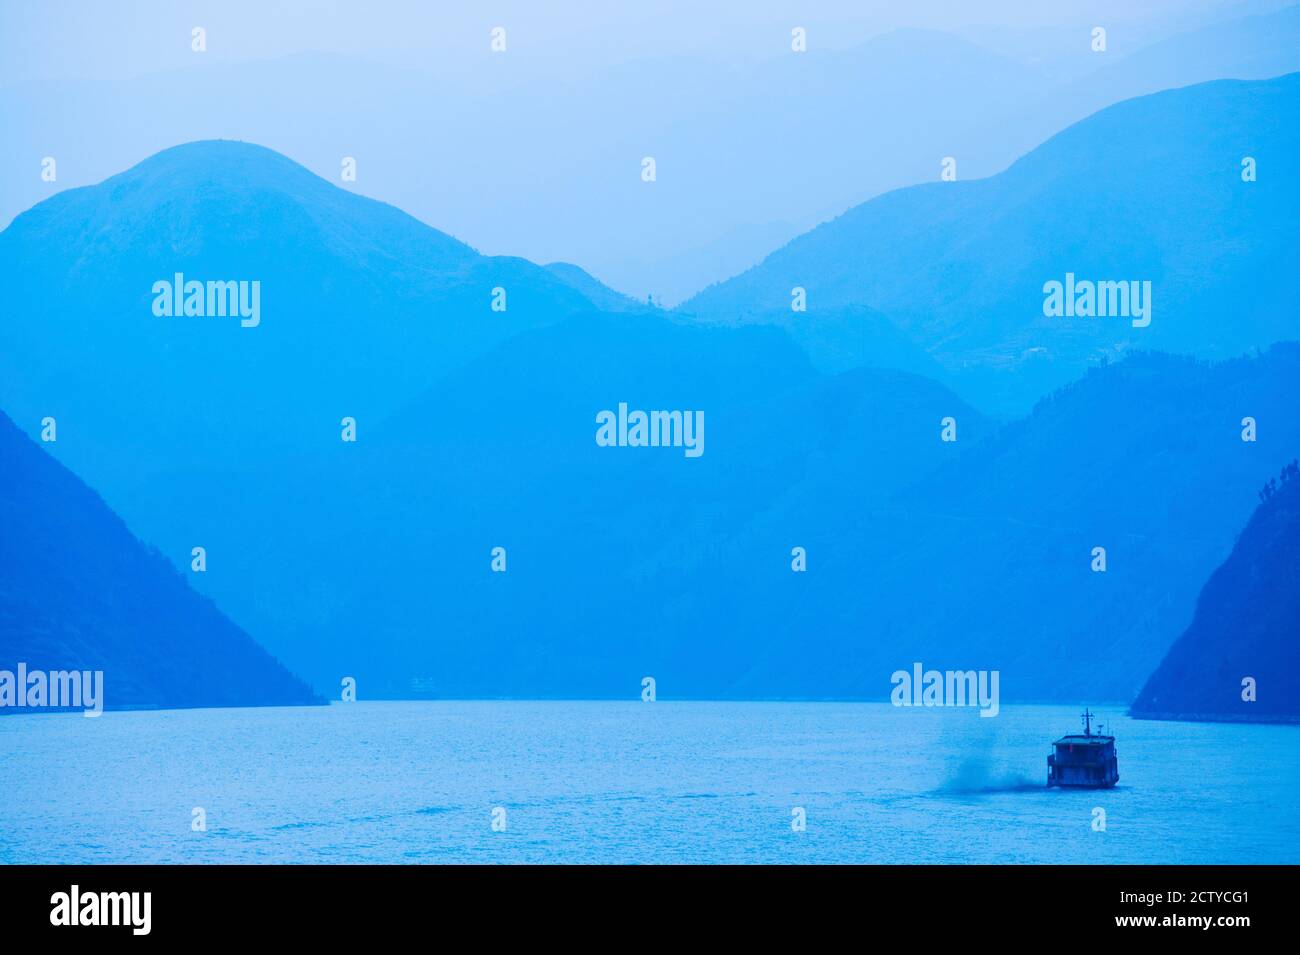 Boat in the river with foggy mountains in the background, Wu Gorge, Yangtze River, Hubei Province, China Stock Photo